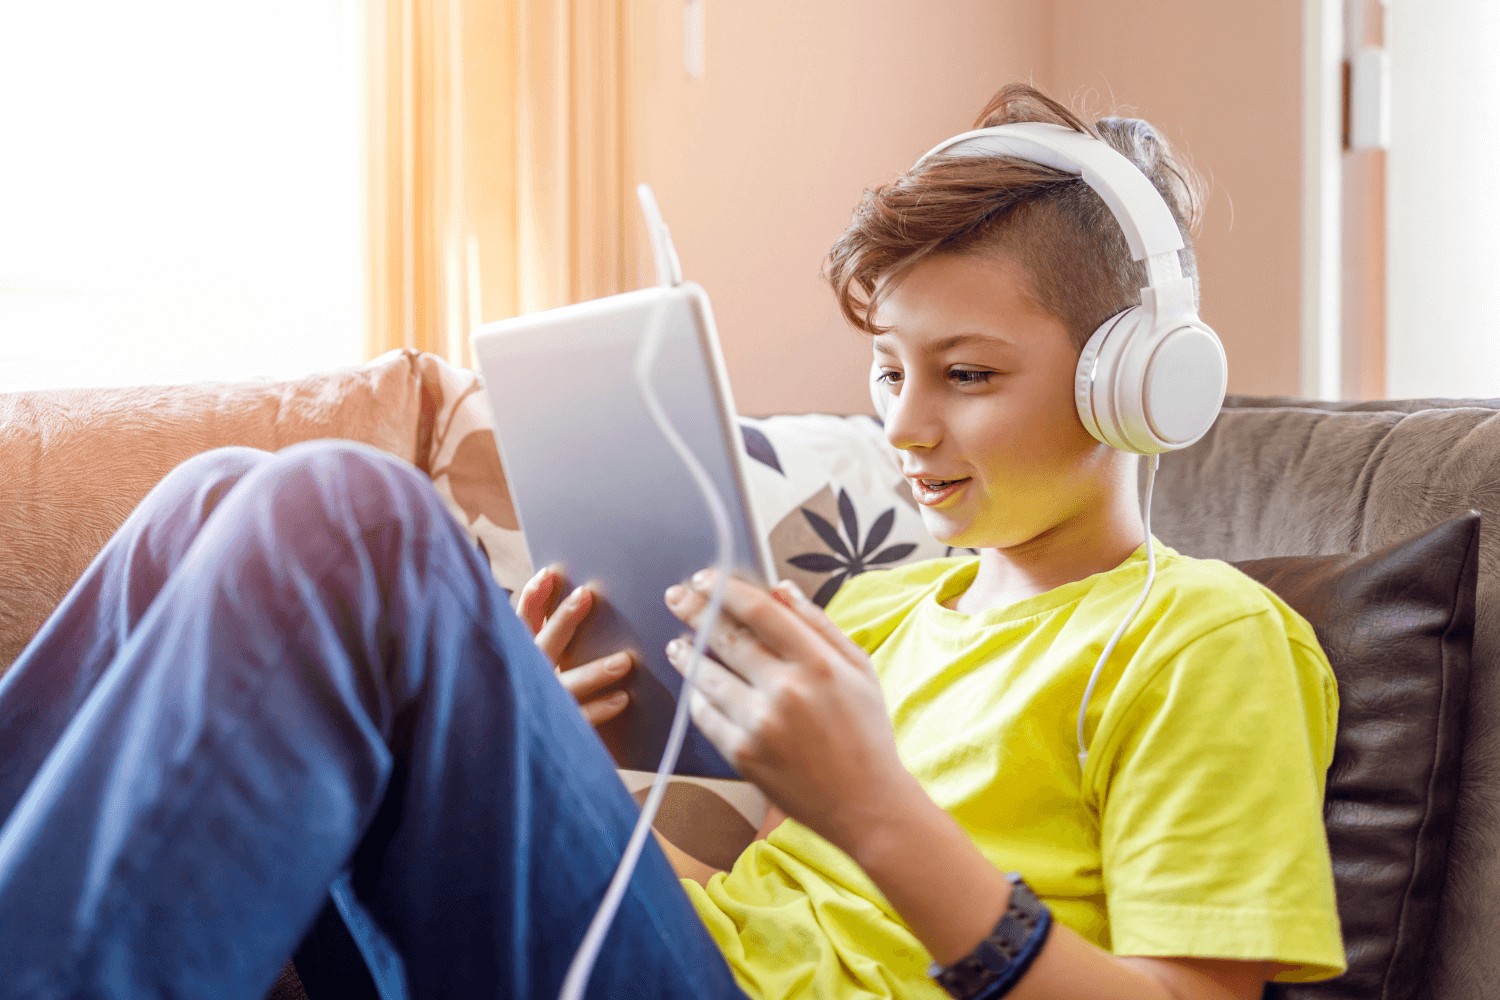 Young boy in a yellow shirt watching something on his tablet while wearing headphones